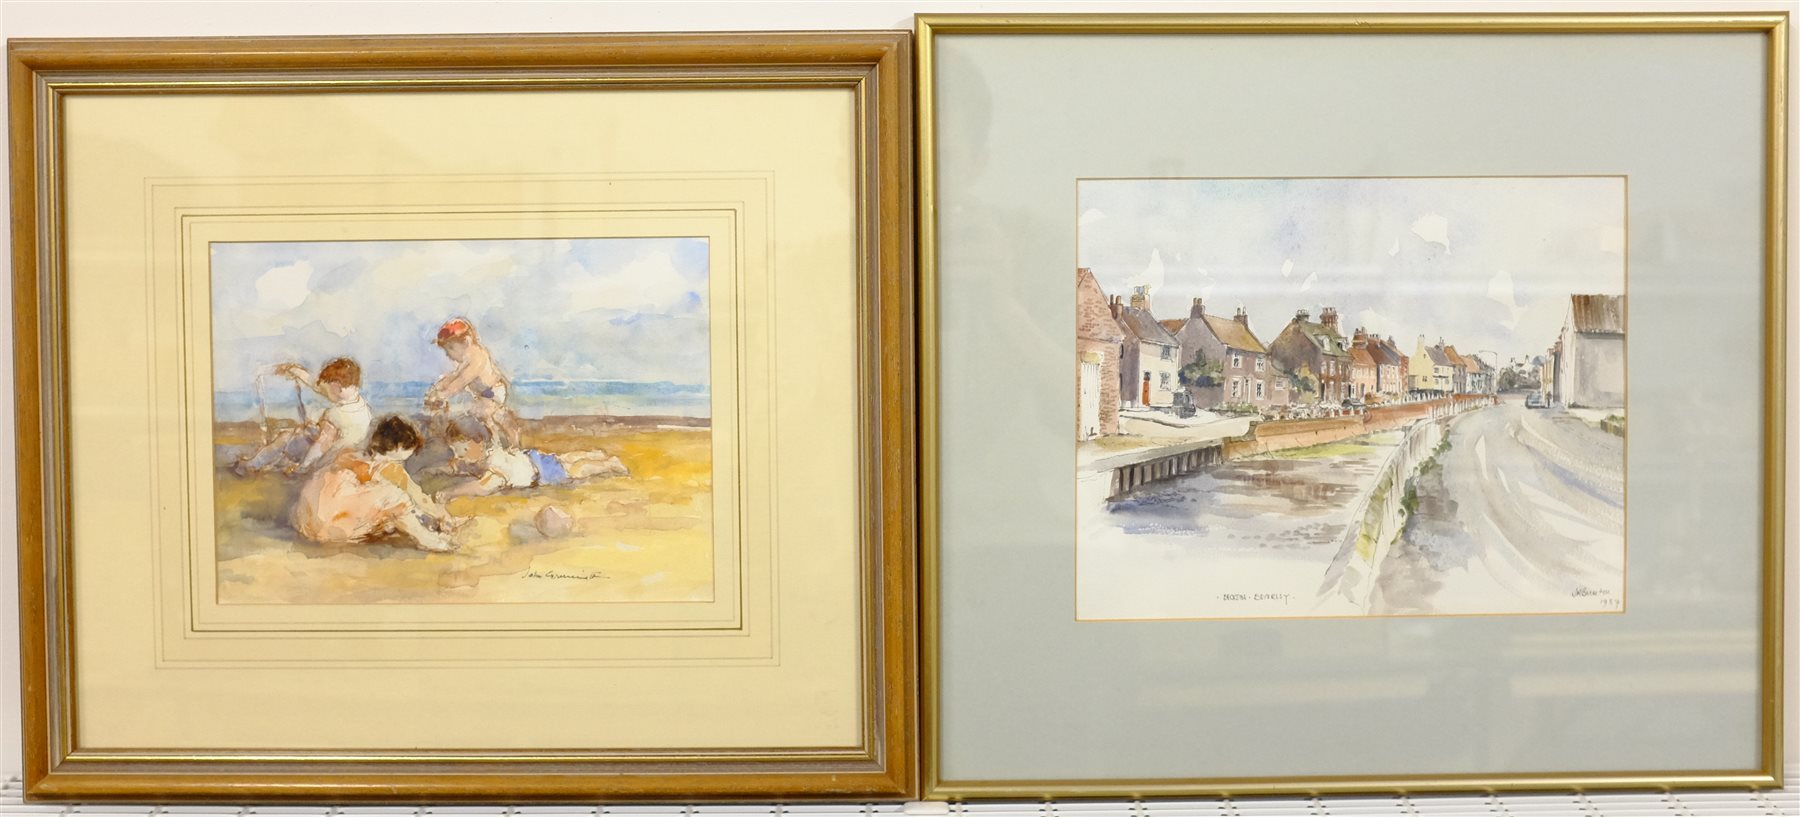 J R Burton (British 20th century): 'Beckside Beverley', watercolour signed titled and dated 1987; G